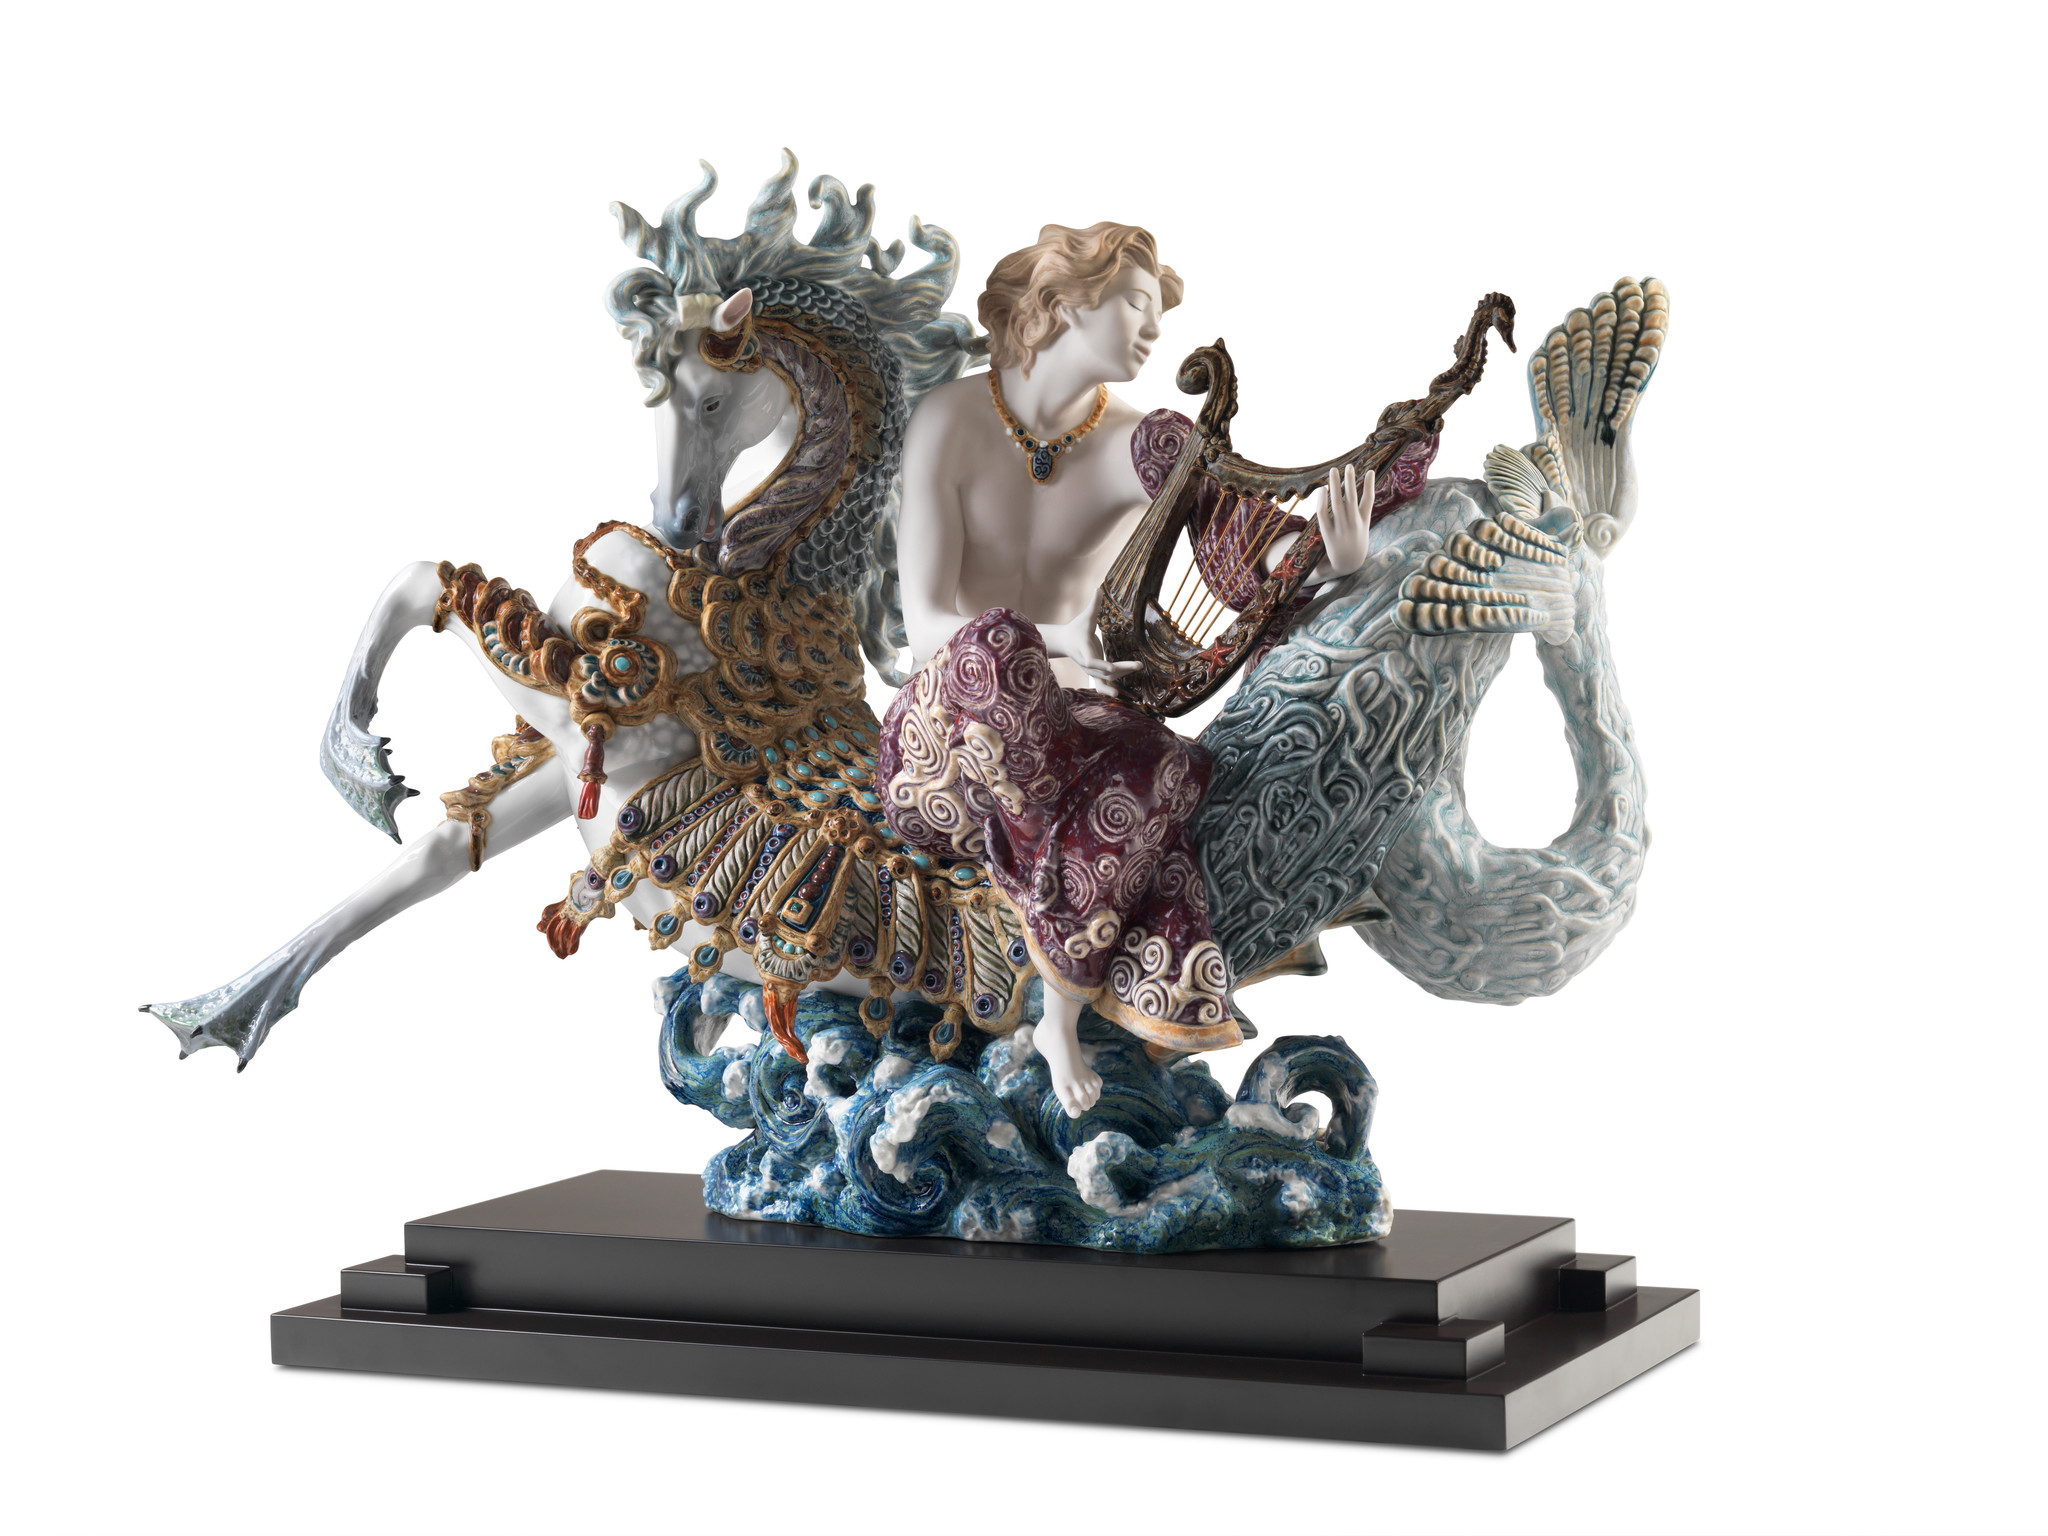 Lladro Aztec dance sculpture. Limited edition.Francisco Polope -  HeartofArt; the Art of Giving